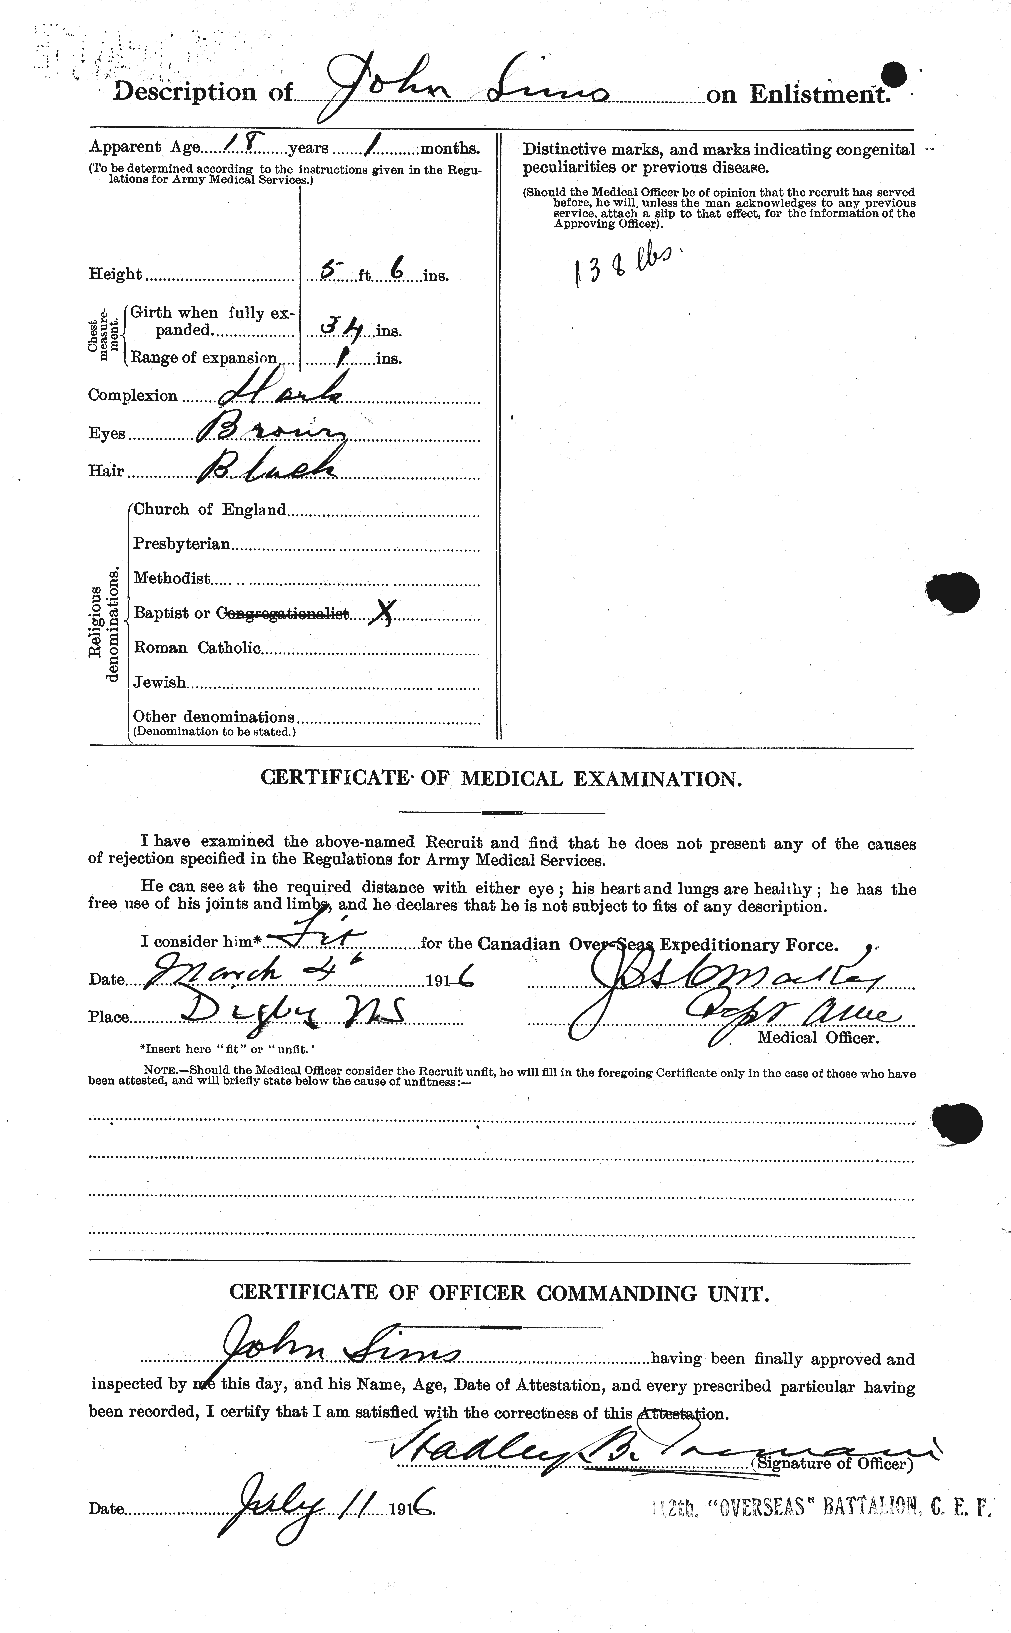 Personnel Records of the First World War - CEF 097385b